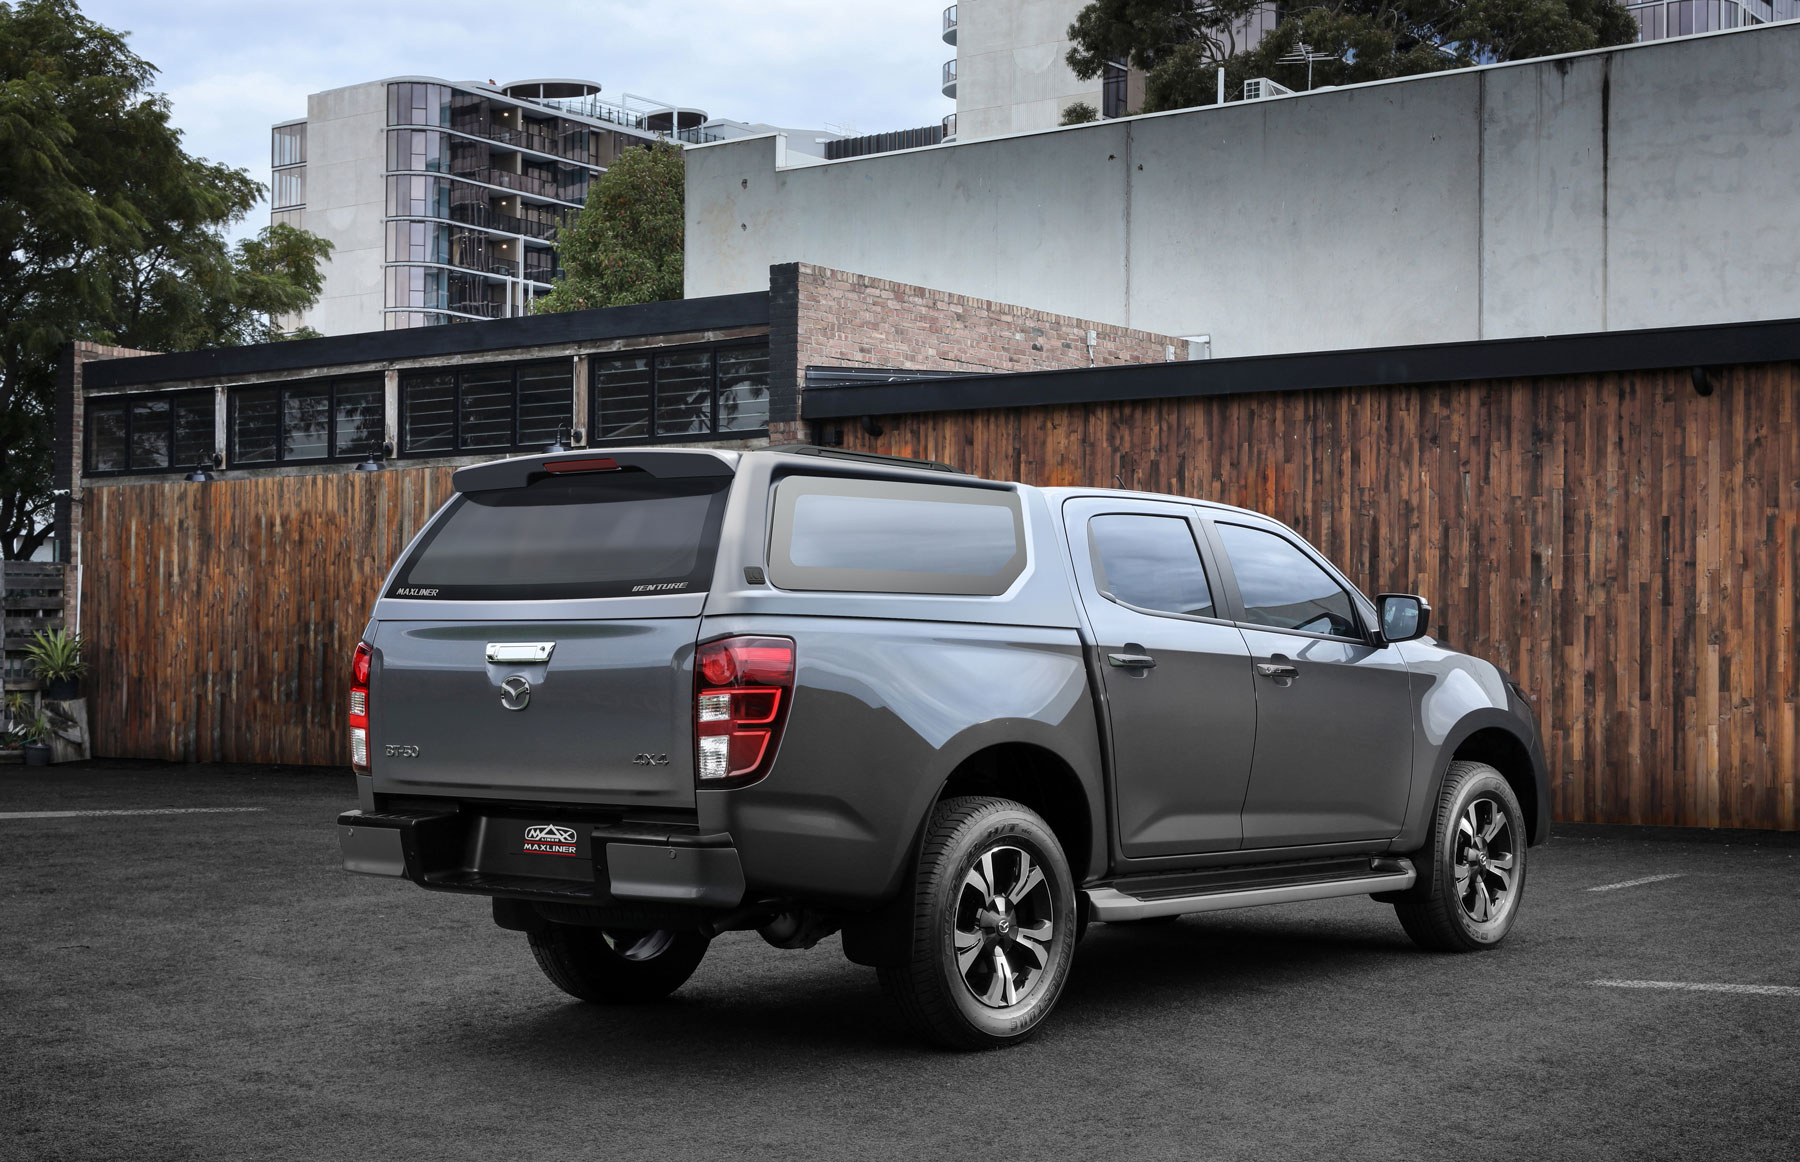 VENTURE CANOPY FOR ISUZU D-MAX & MAZDA BT-50 LAUNCHES-Image